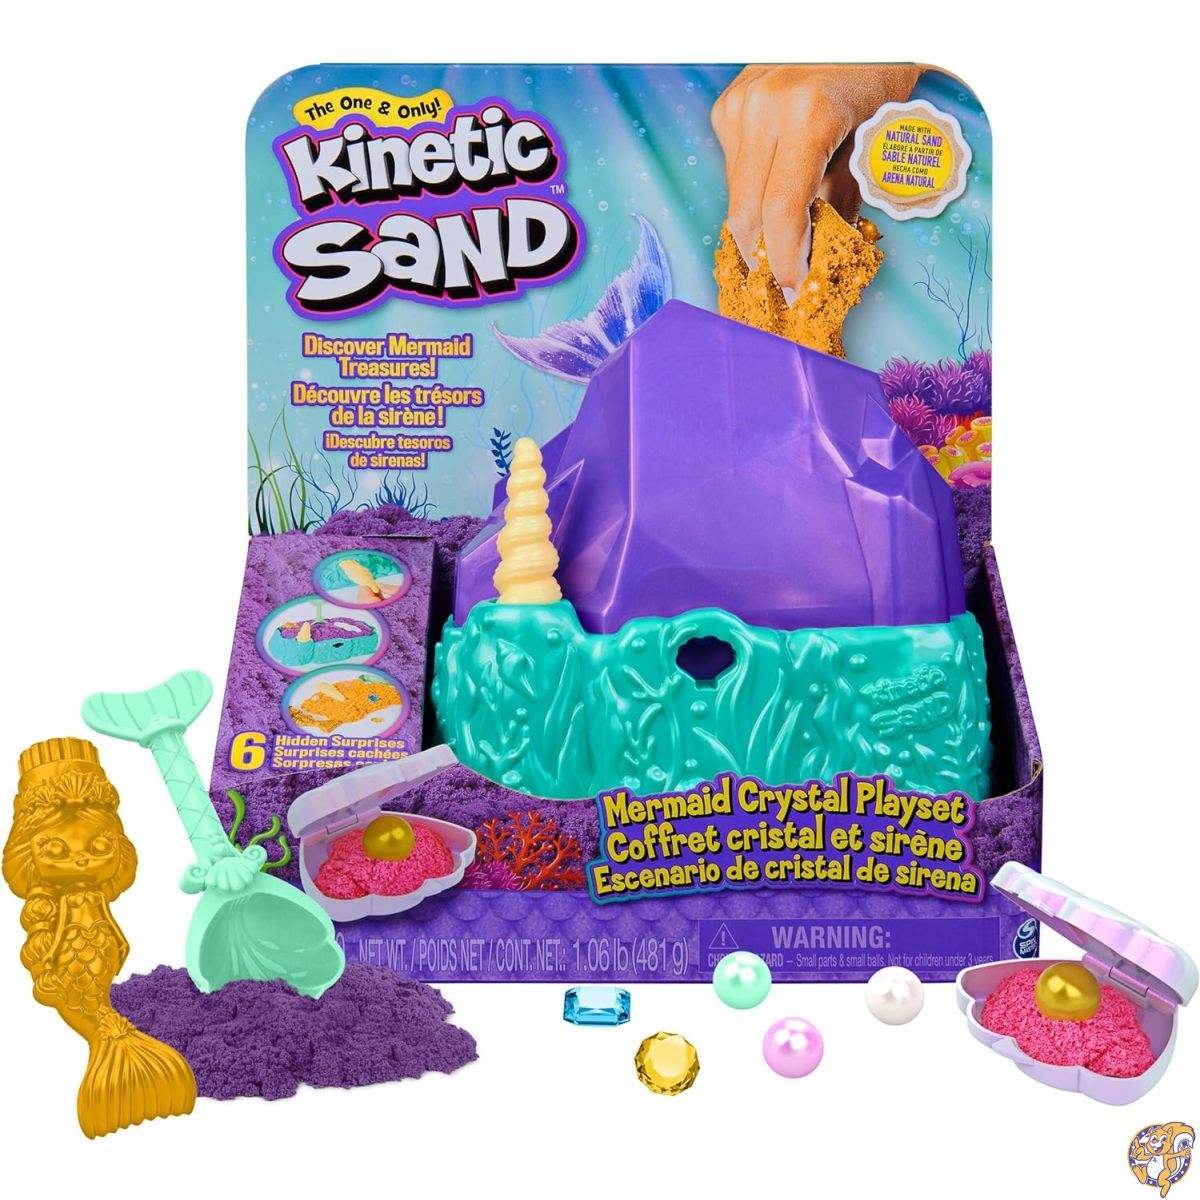 Mermaid Crystal Playset, Over 1lbs of Play Sand, Gold Shimmer Storage and Tools, Sensory Toys for Kids Ages 3 up